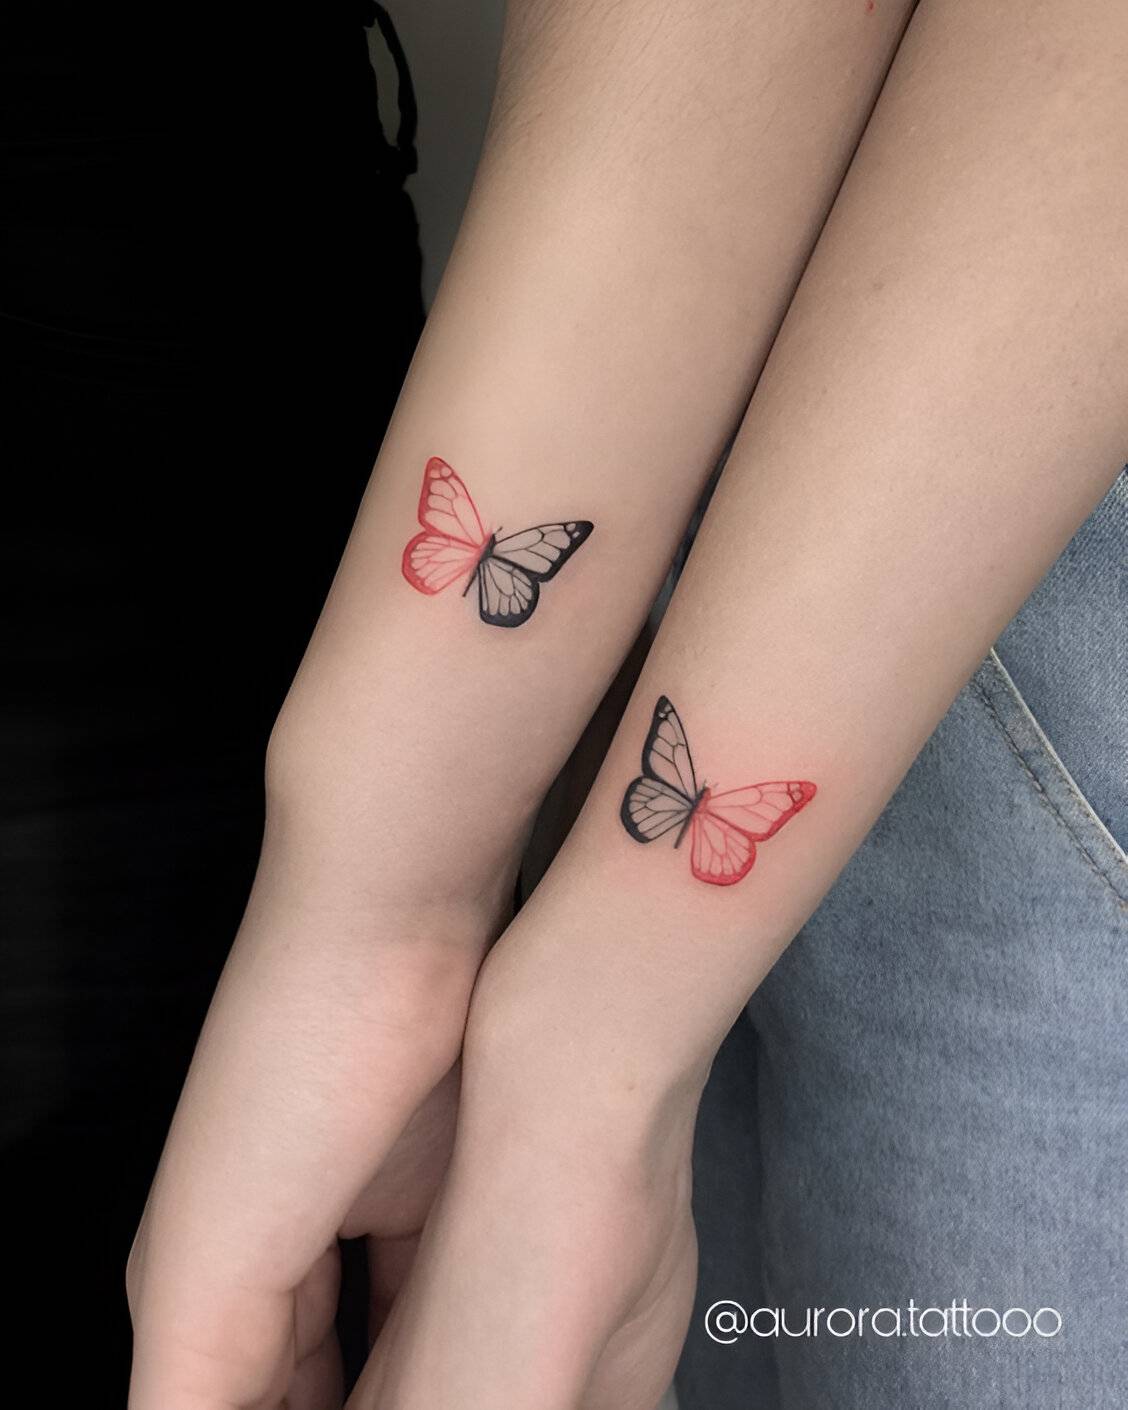 27 Feminine Best Friend Tattoos With The Perfect Elegant Touch 16